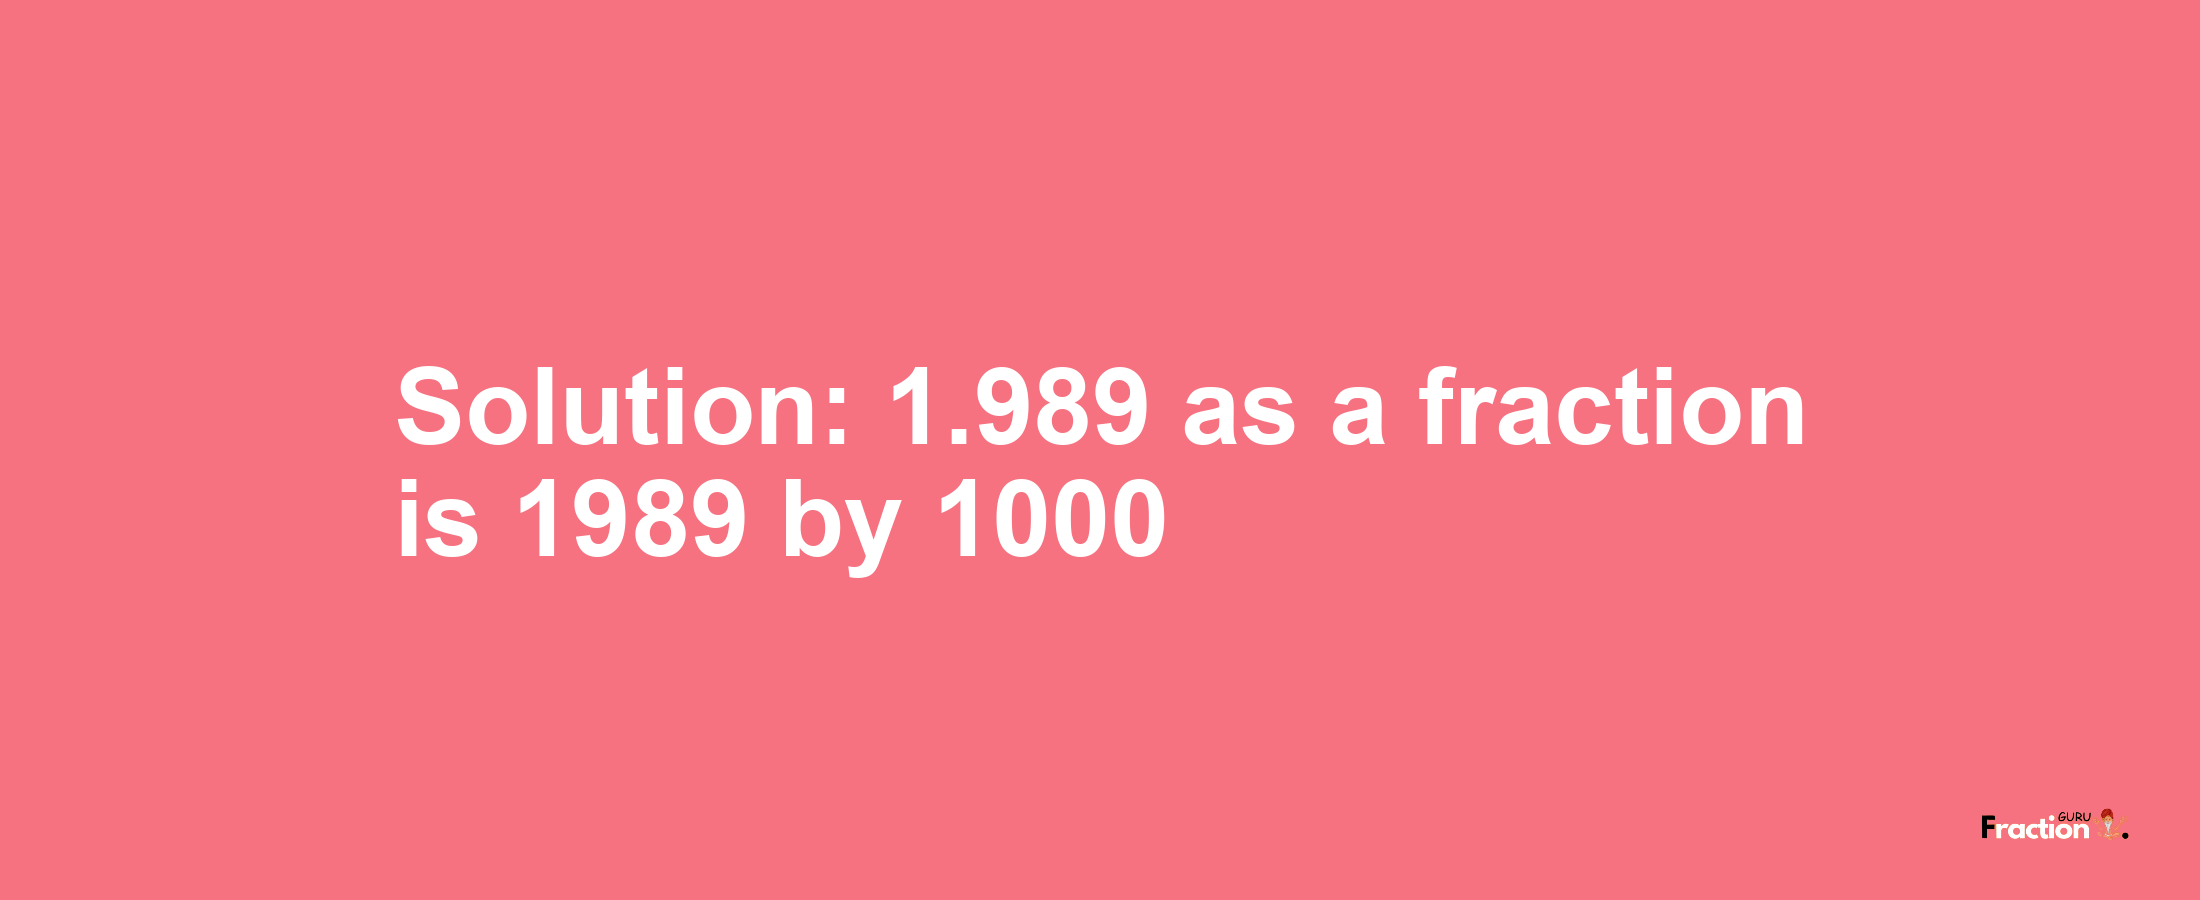 Solution:1.989 as a fraction is 1989/1000